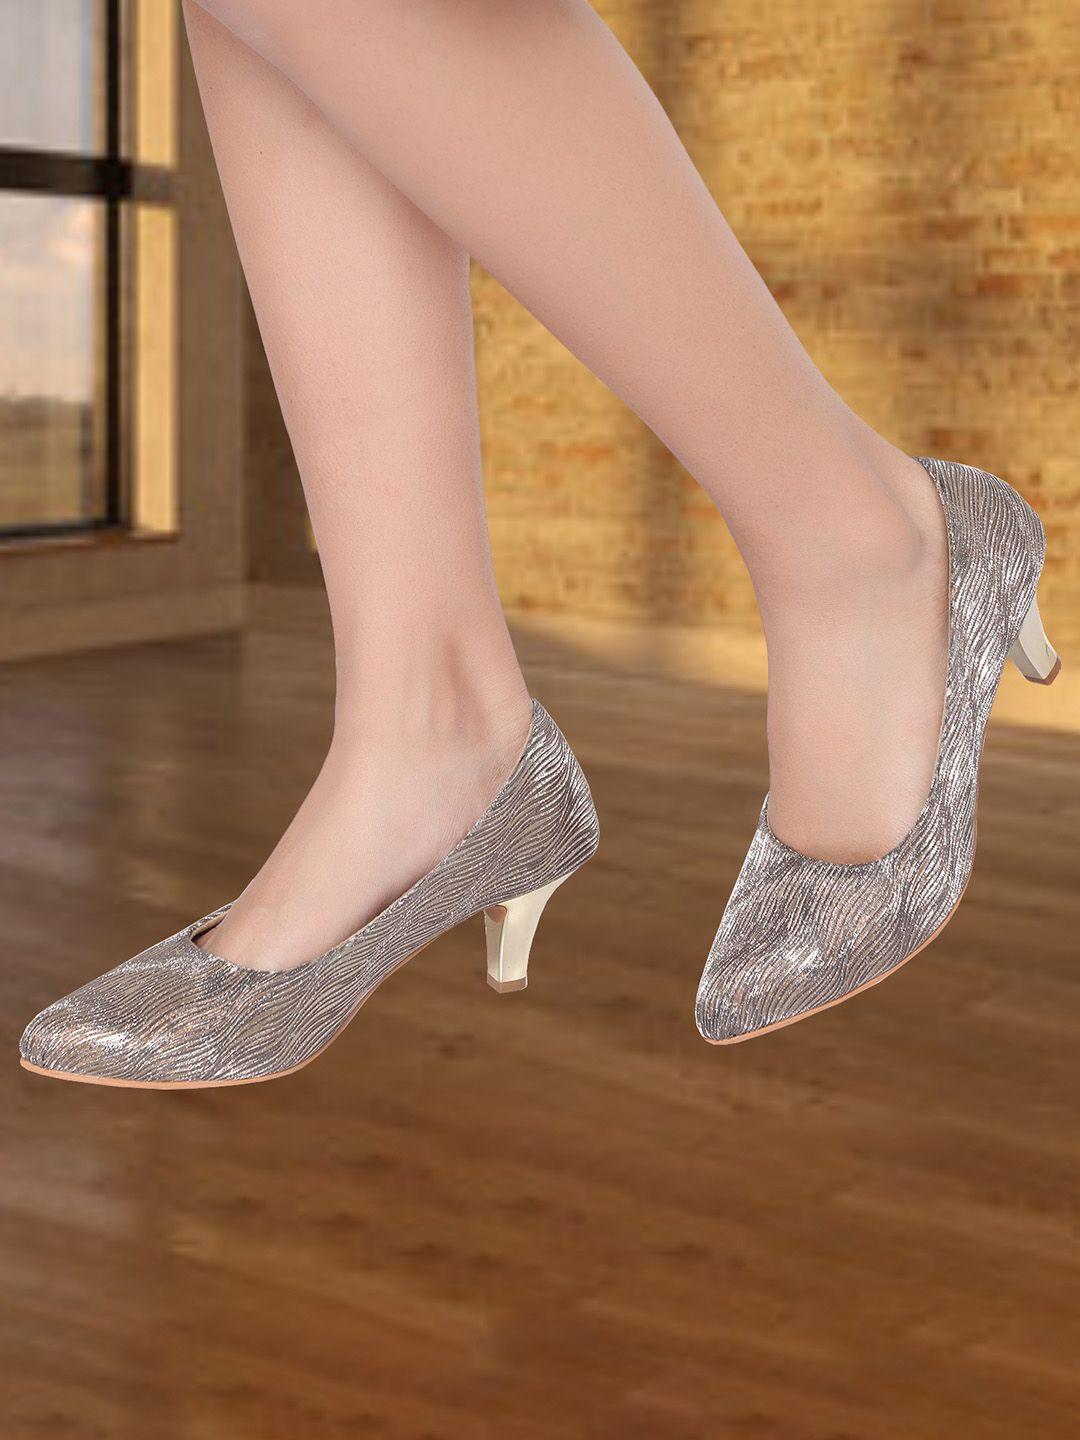 action pointed toe embellished kitten pumps